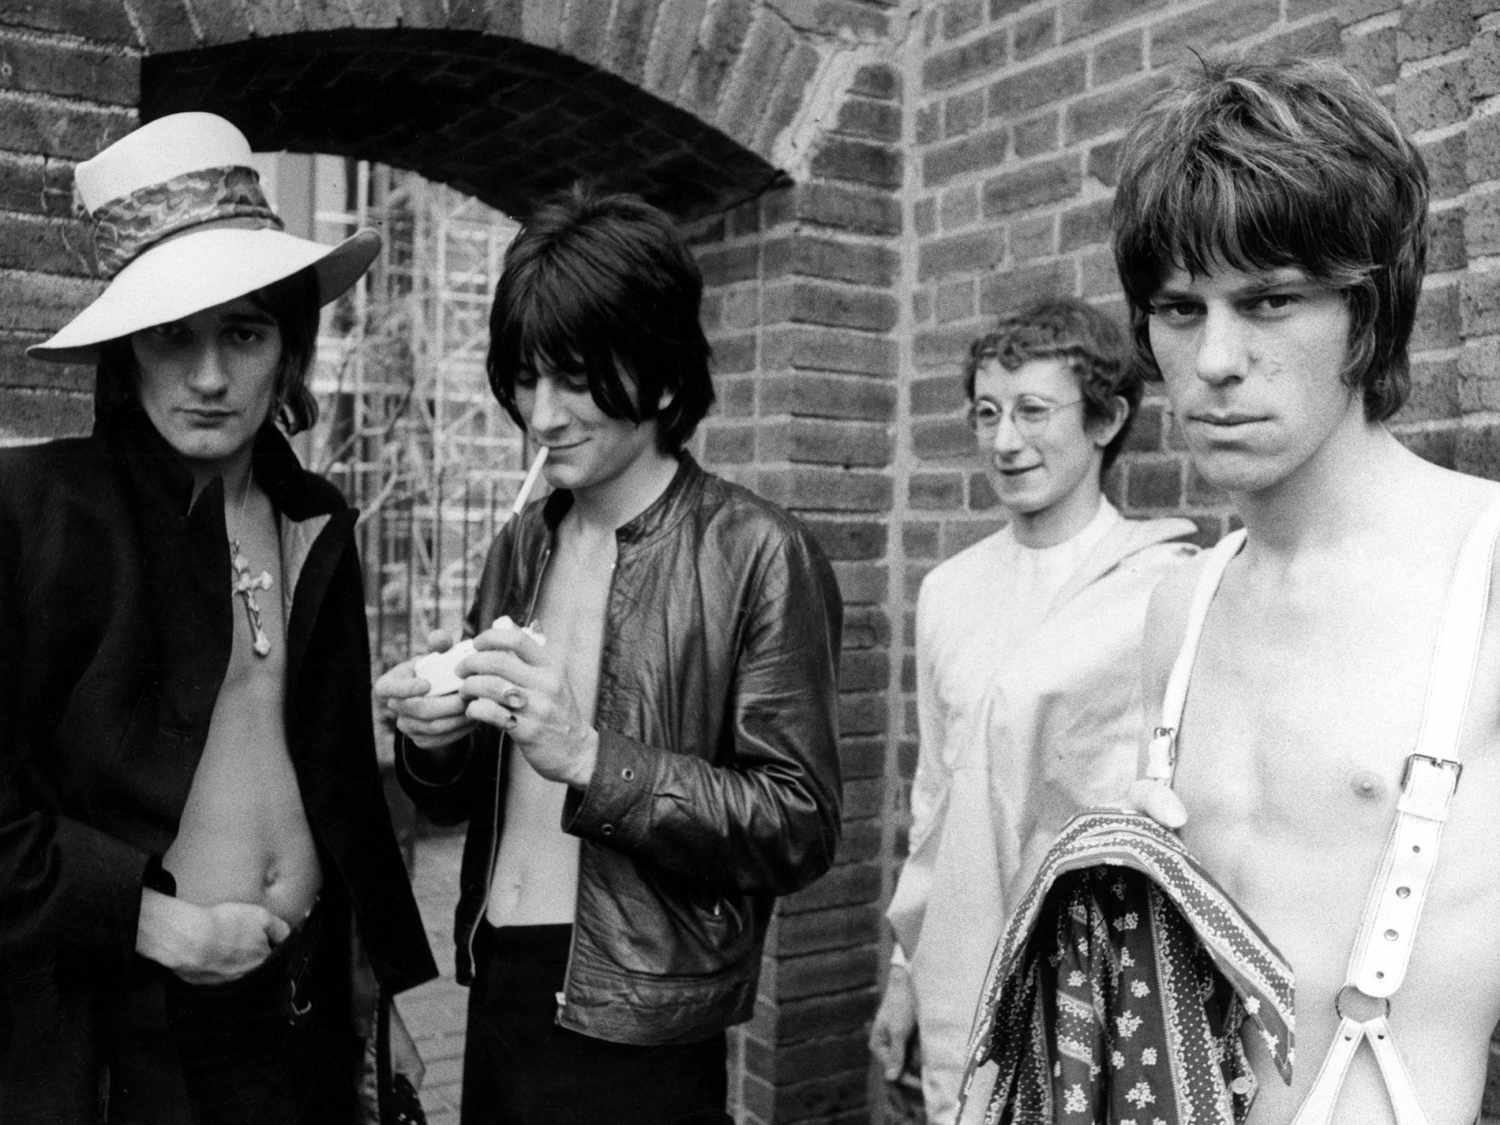 Rod Stewart With Ron Wood, Mickey Waller, and Jeff Beck in 1968